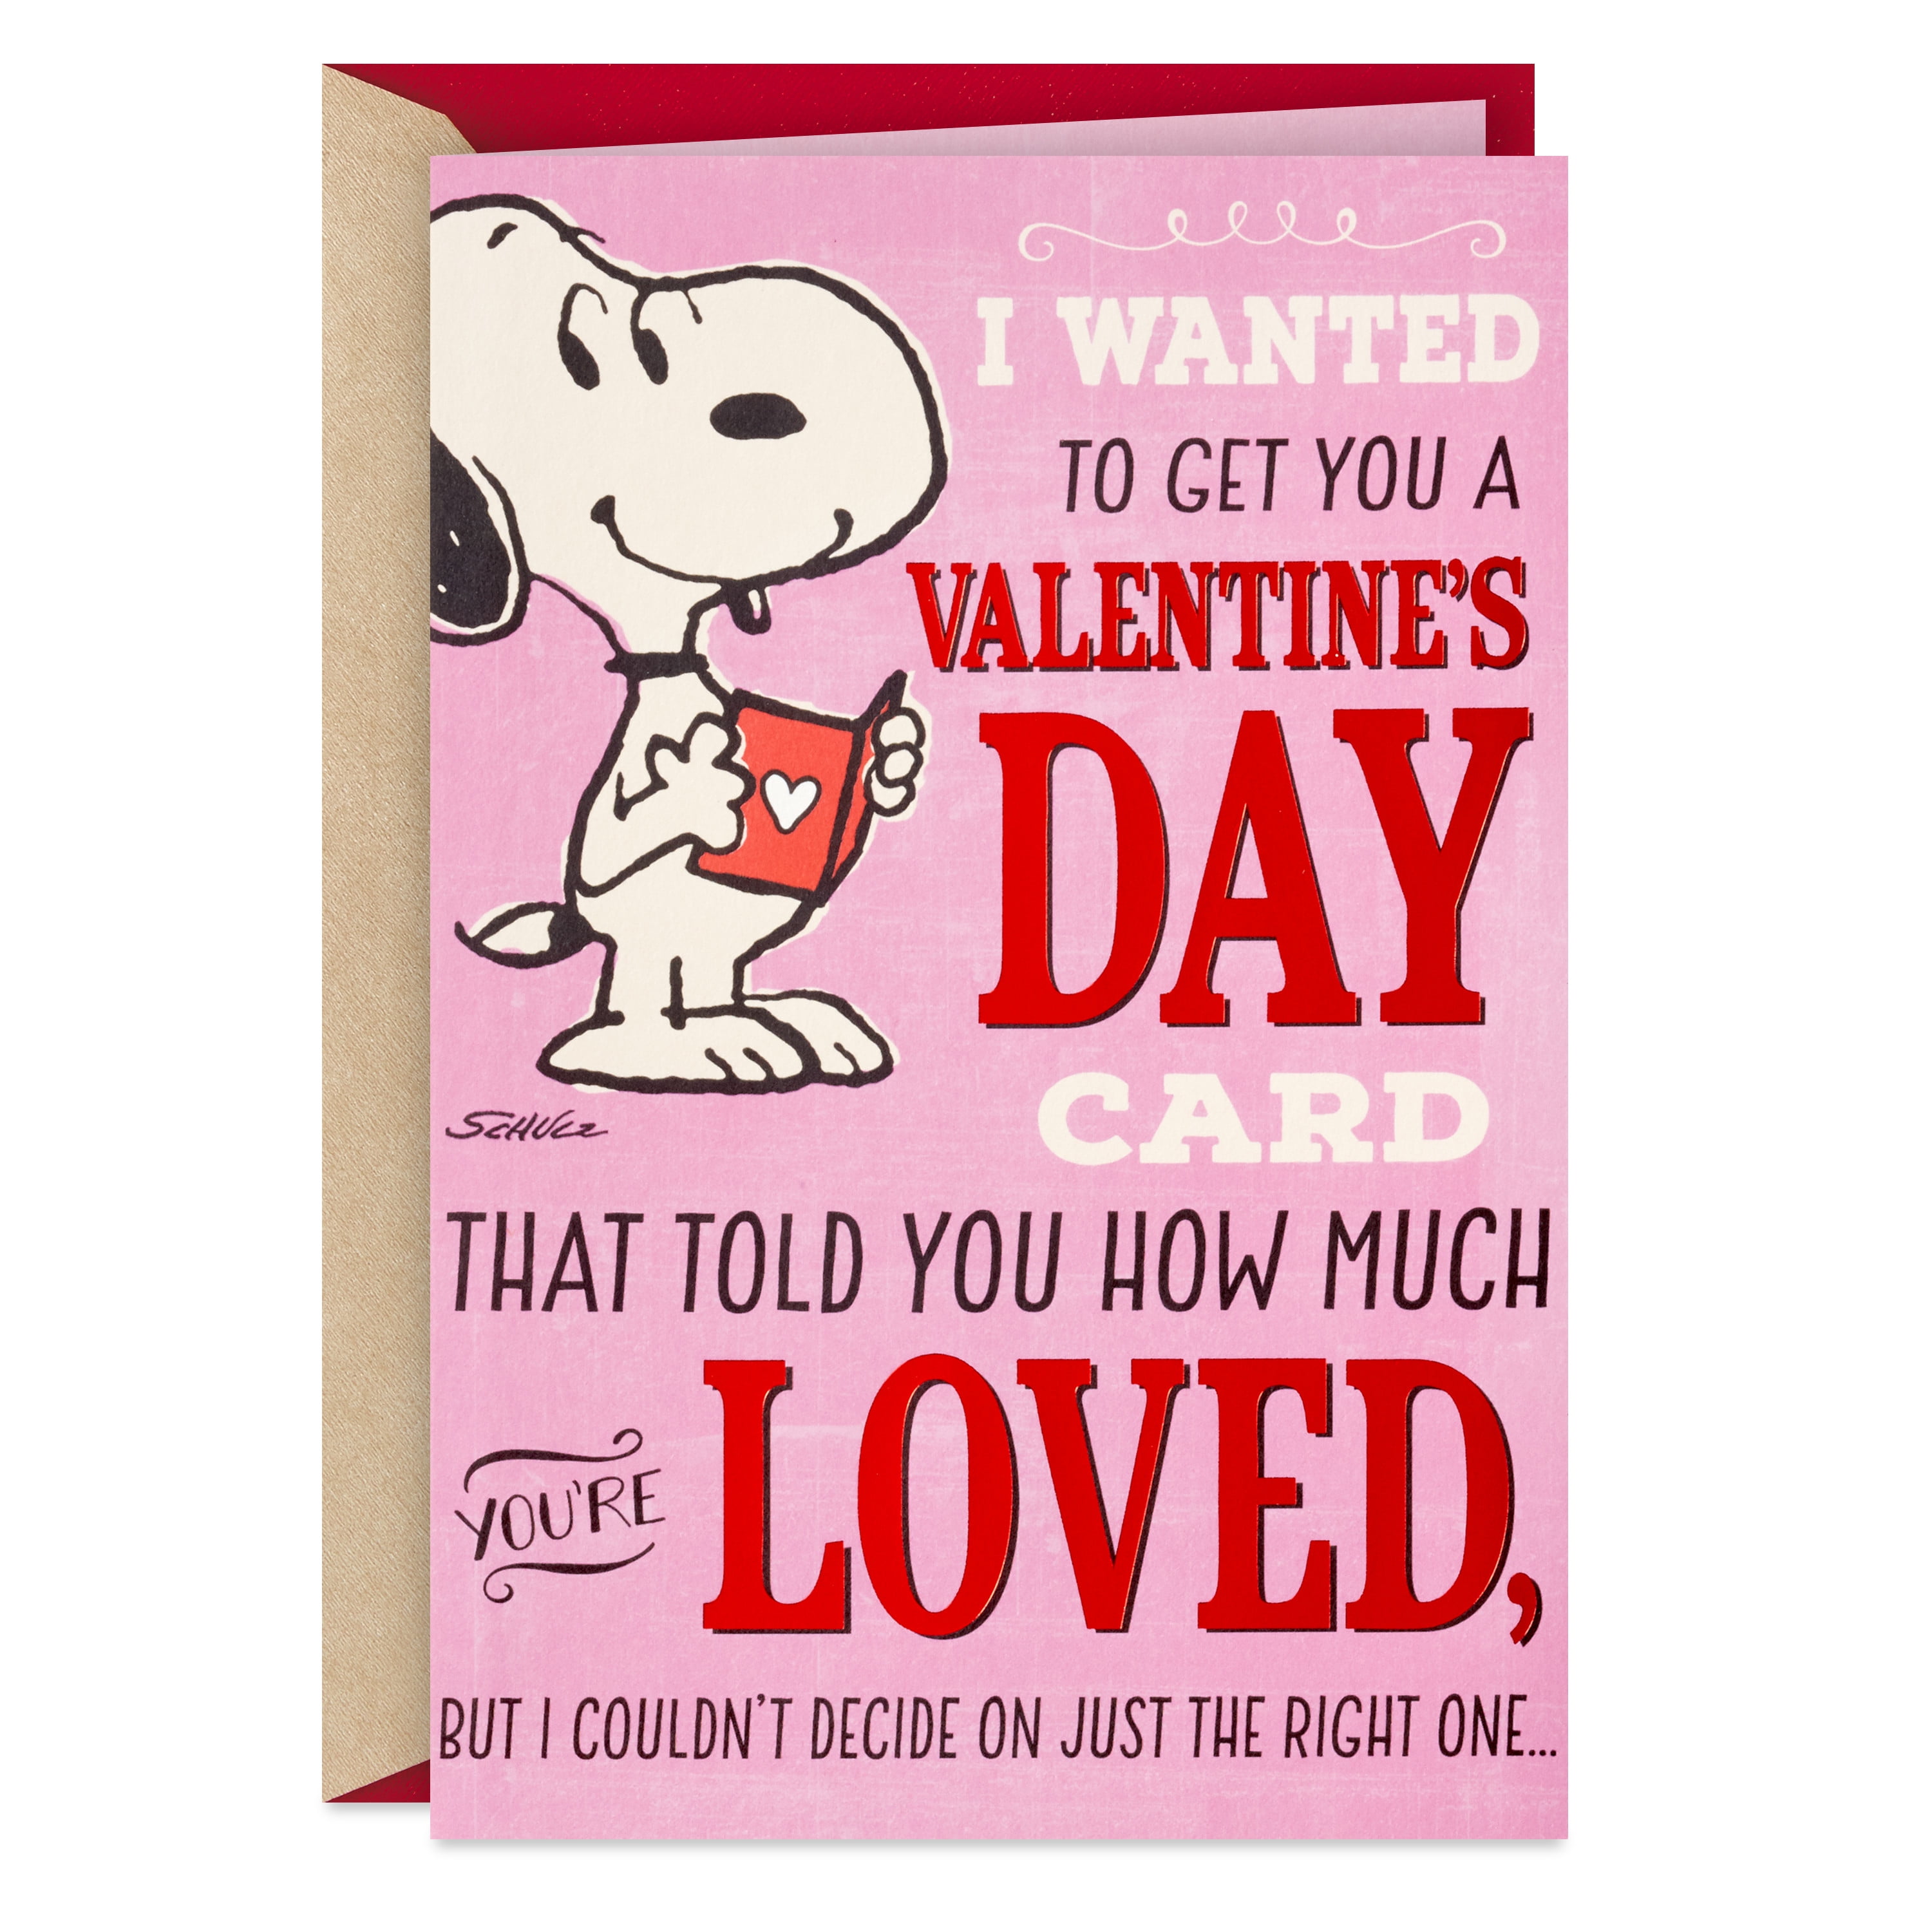 Hallmark Vintage Valentines Day Cards Assortment with Archival Book Organizer Box (12 Cards and Envelopes)